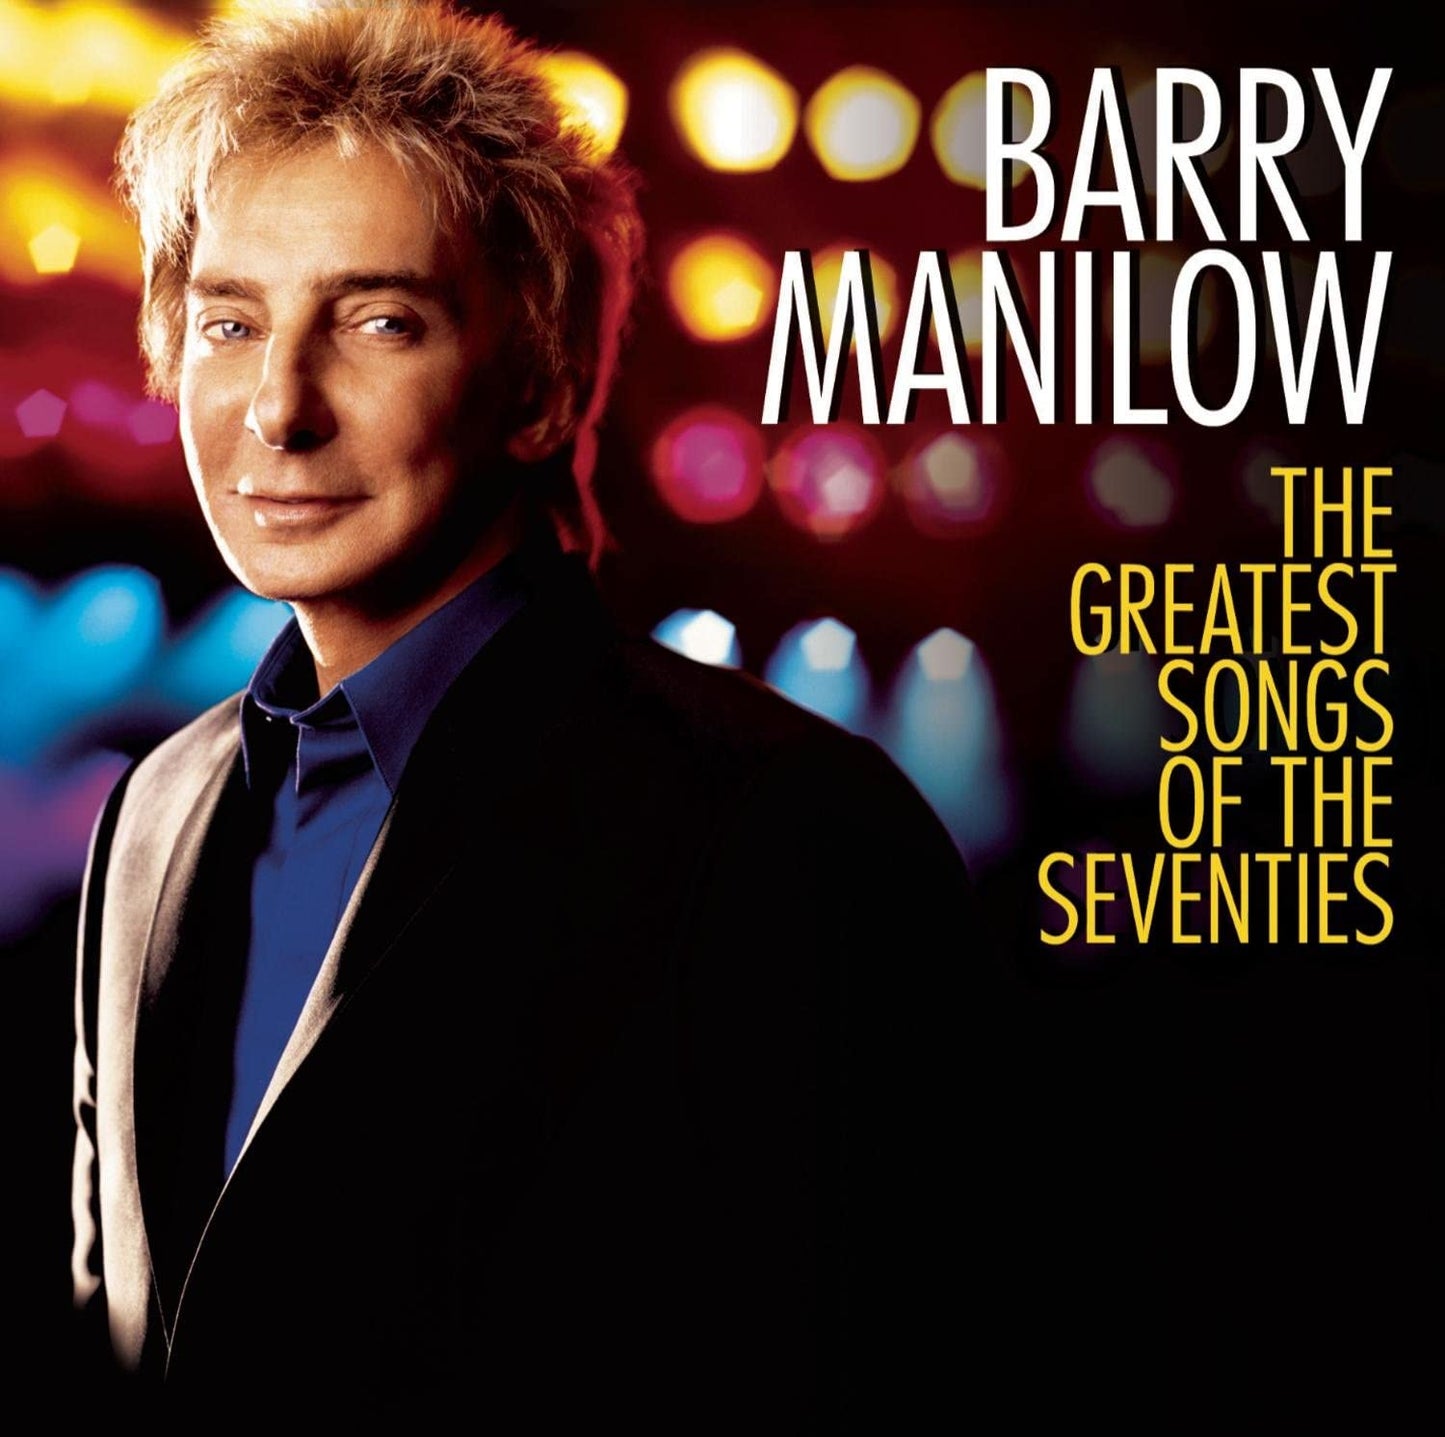 The Greatest Songs Of The Seventies [Audio CD] Manilow/ Barry